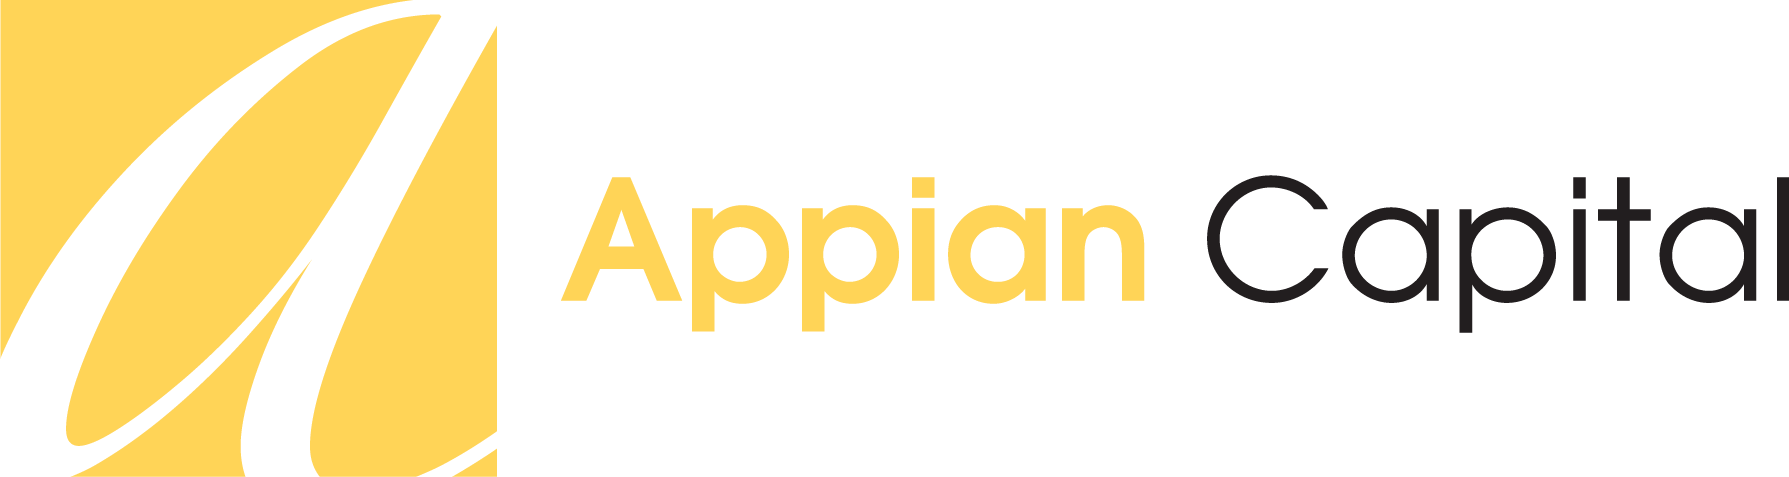 Appian Logo - Appian Capital | Real Estate Investment Manager | Retail ...